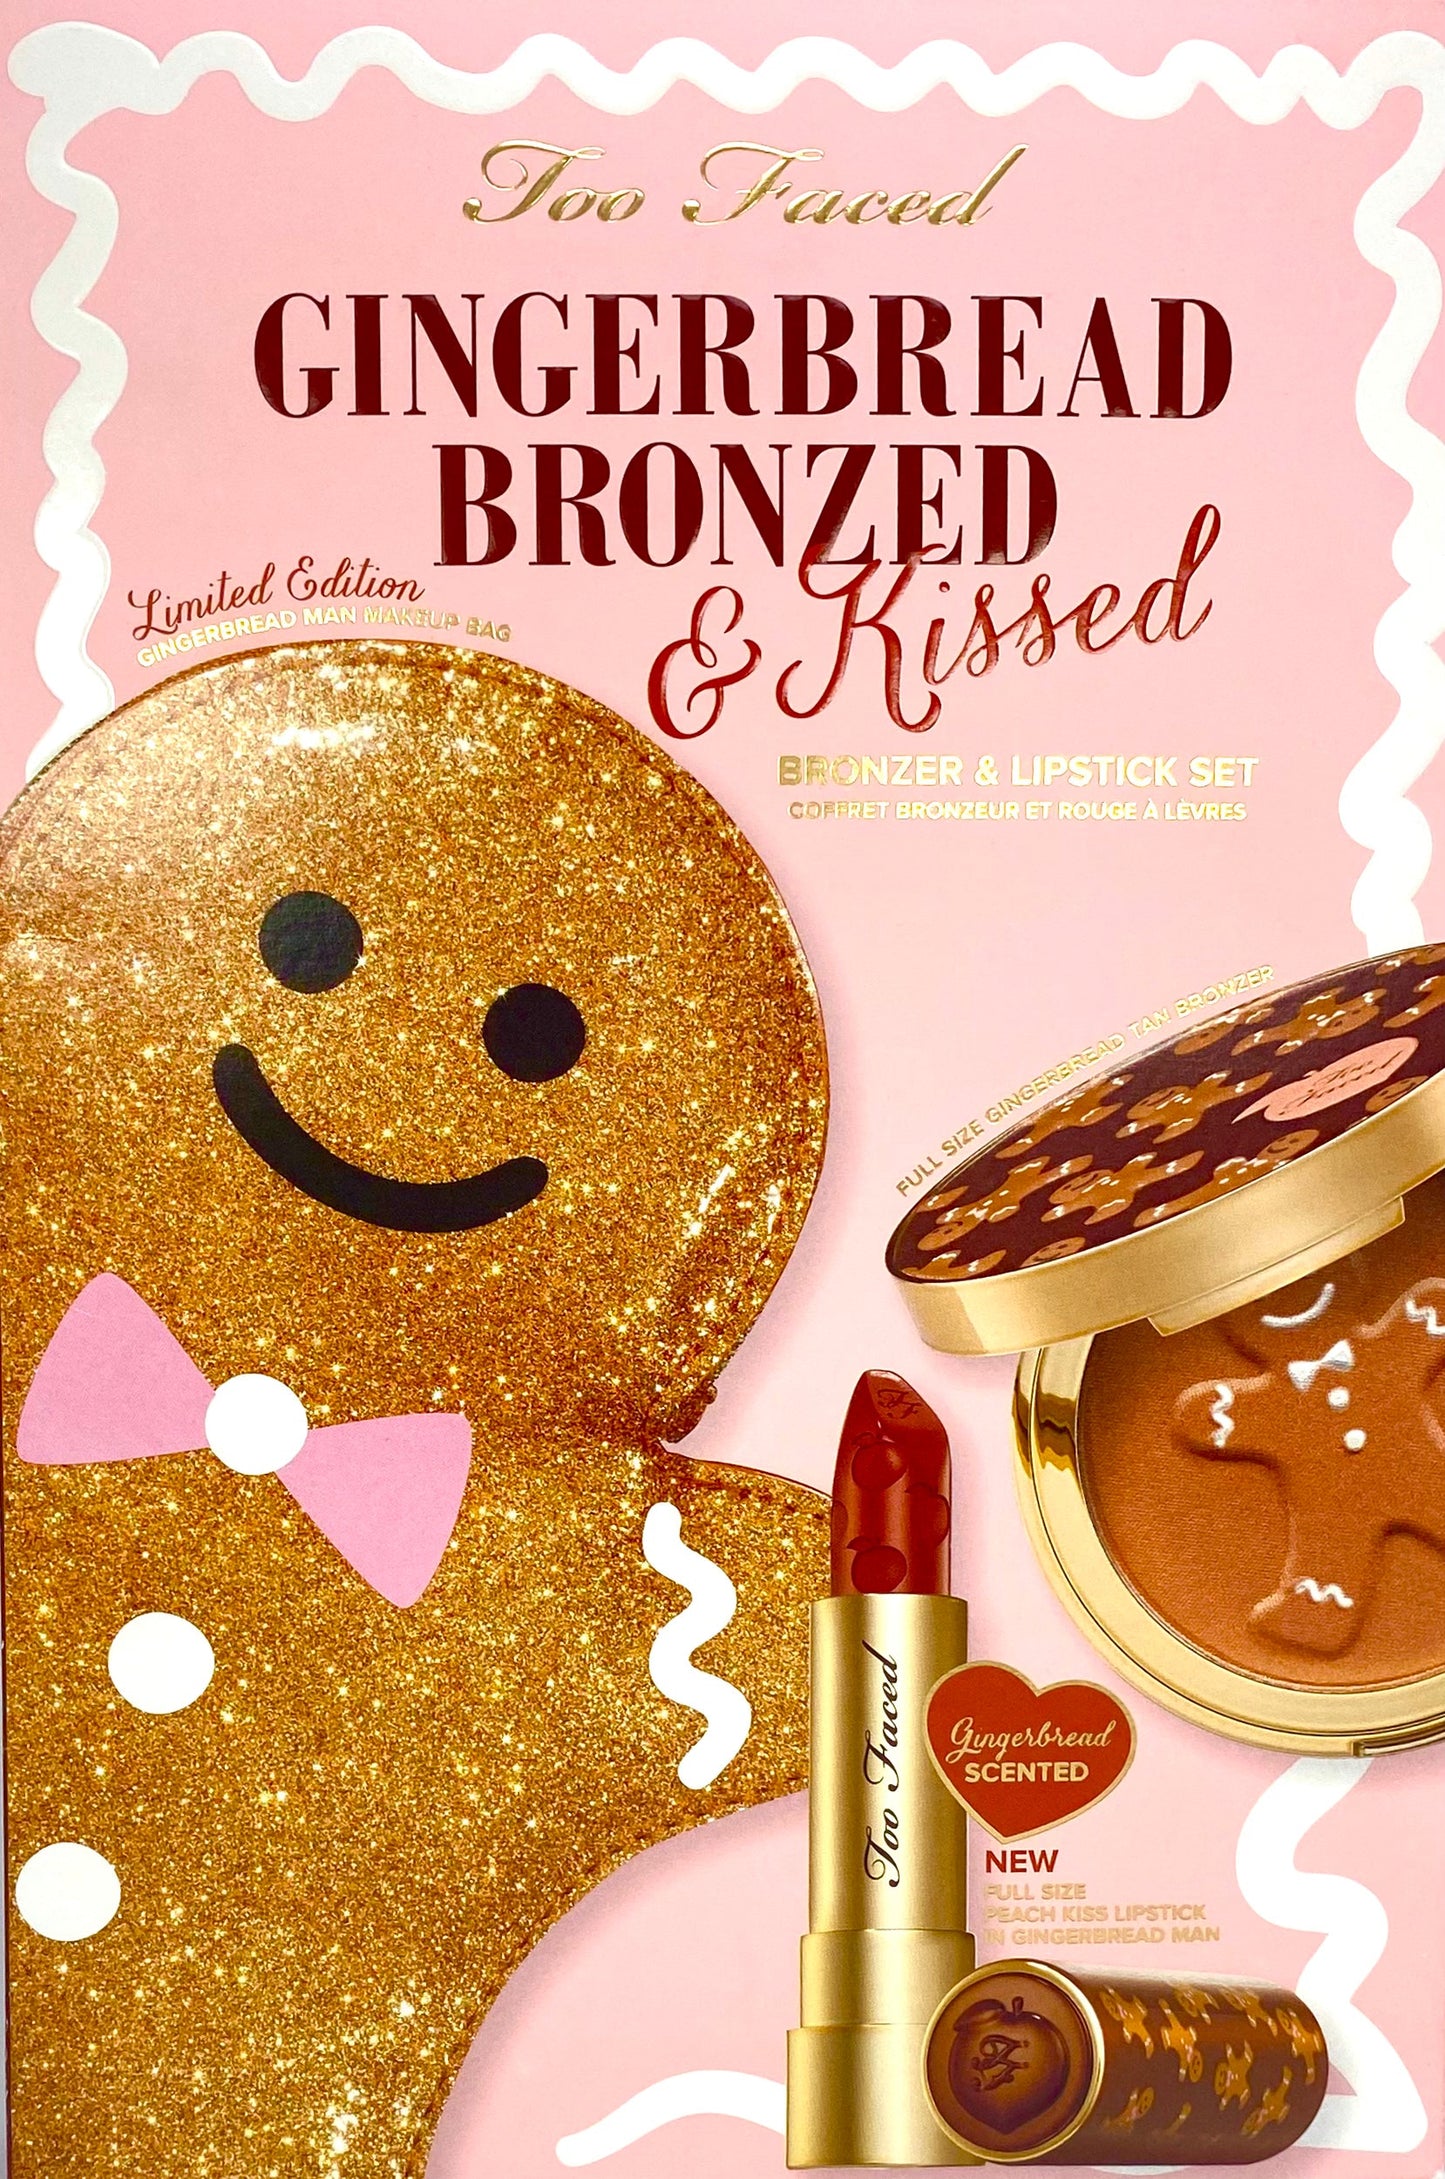 Too Faced - 'Gingerbread Bronzed and Kissed' Travel Size Bronzer and Lipstick Gift Set